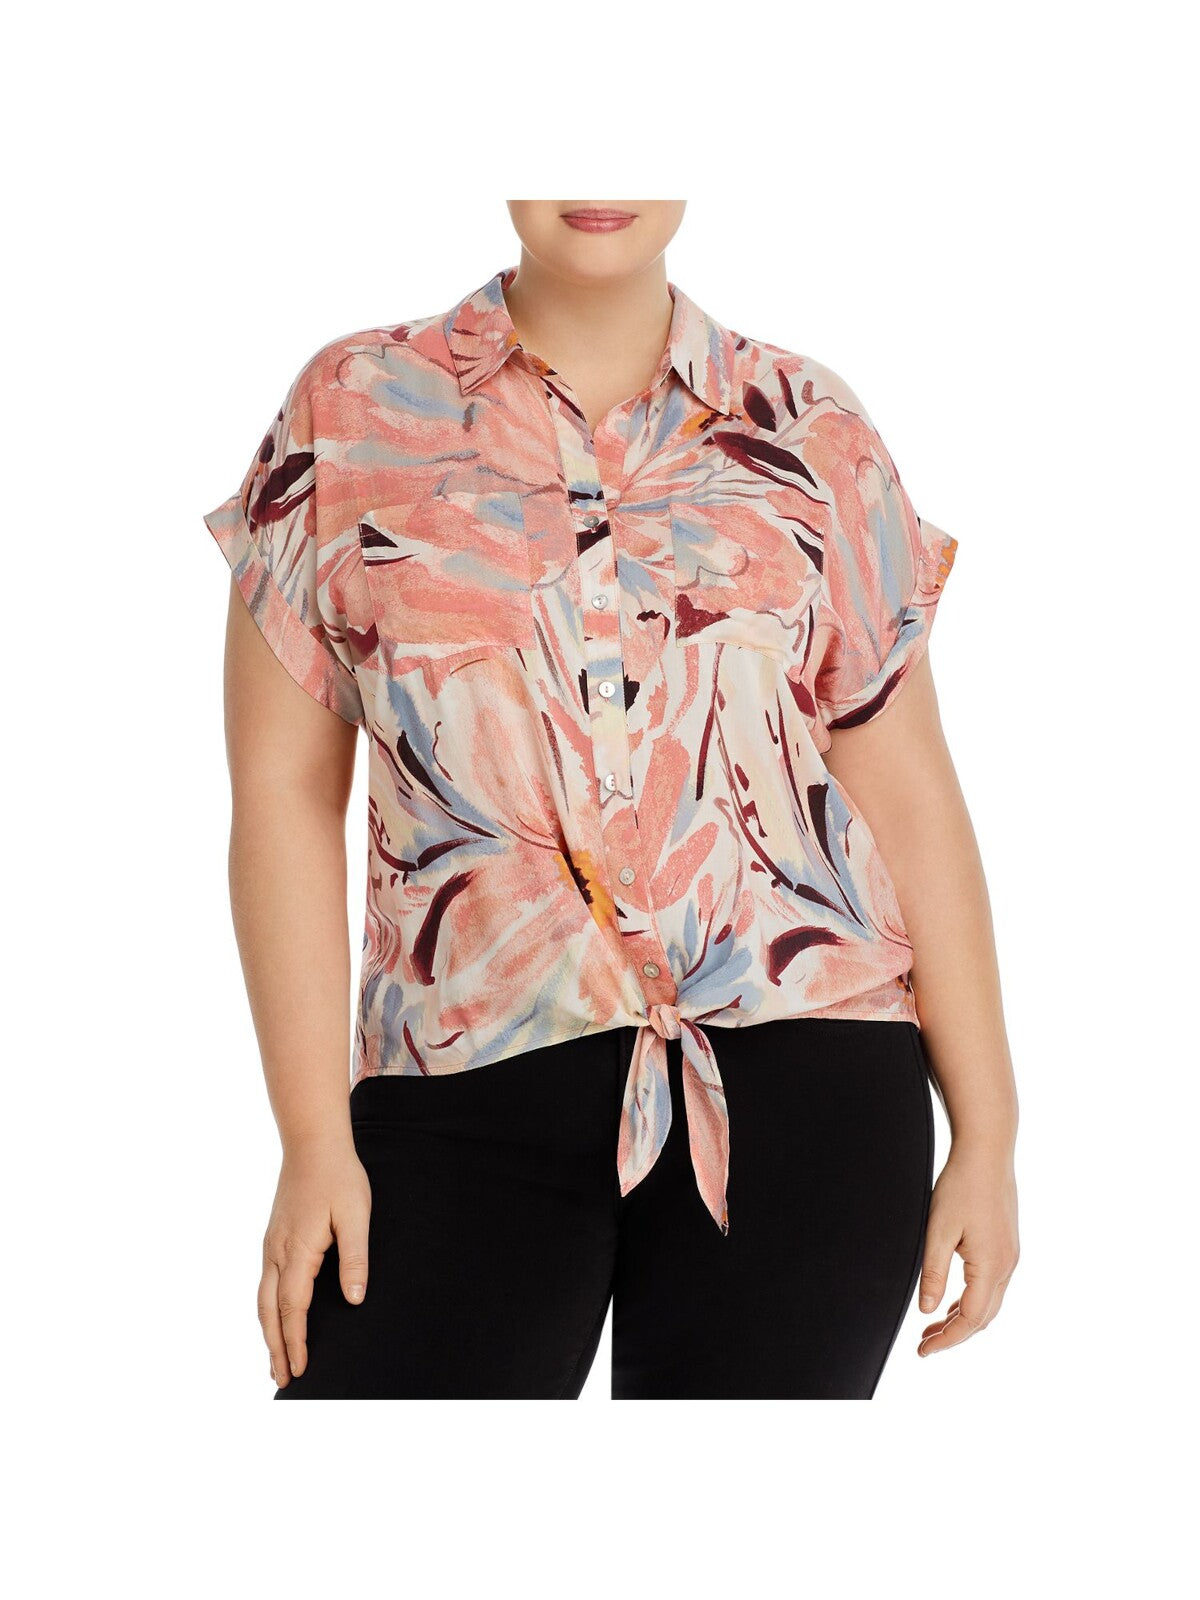 CUPIO BLUSH Womens Pink Pocketed Rolled Cuffs Curved Tie Hem Printed Short Sleeve Button Up Top Plus 3X